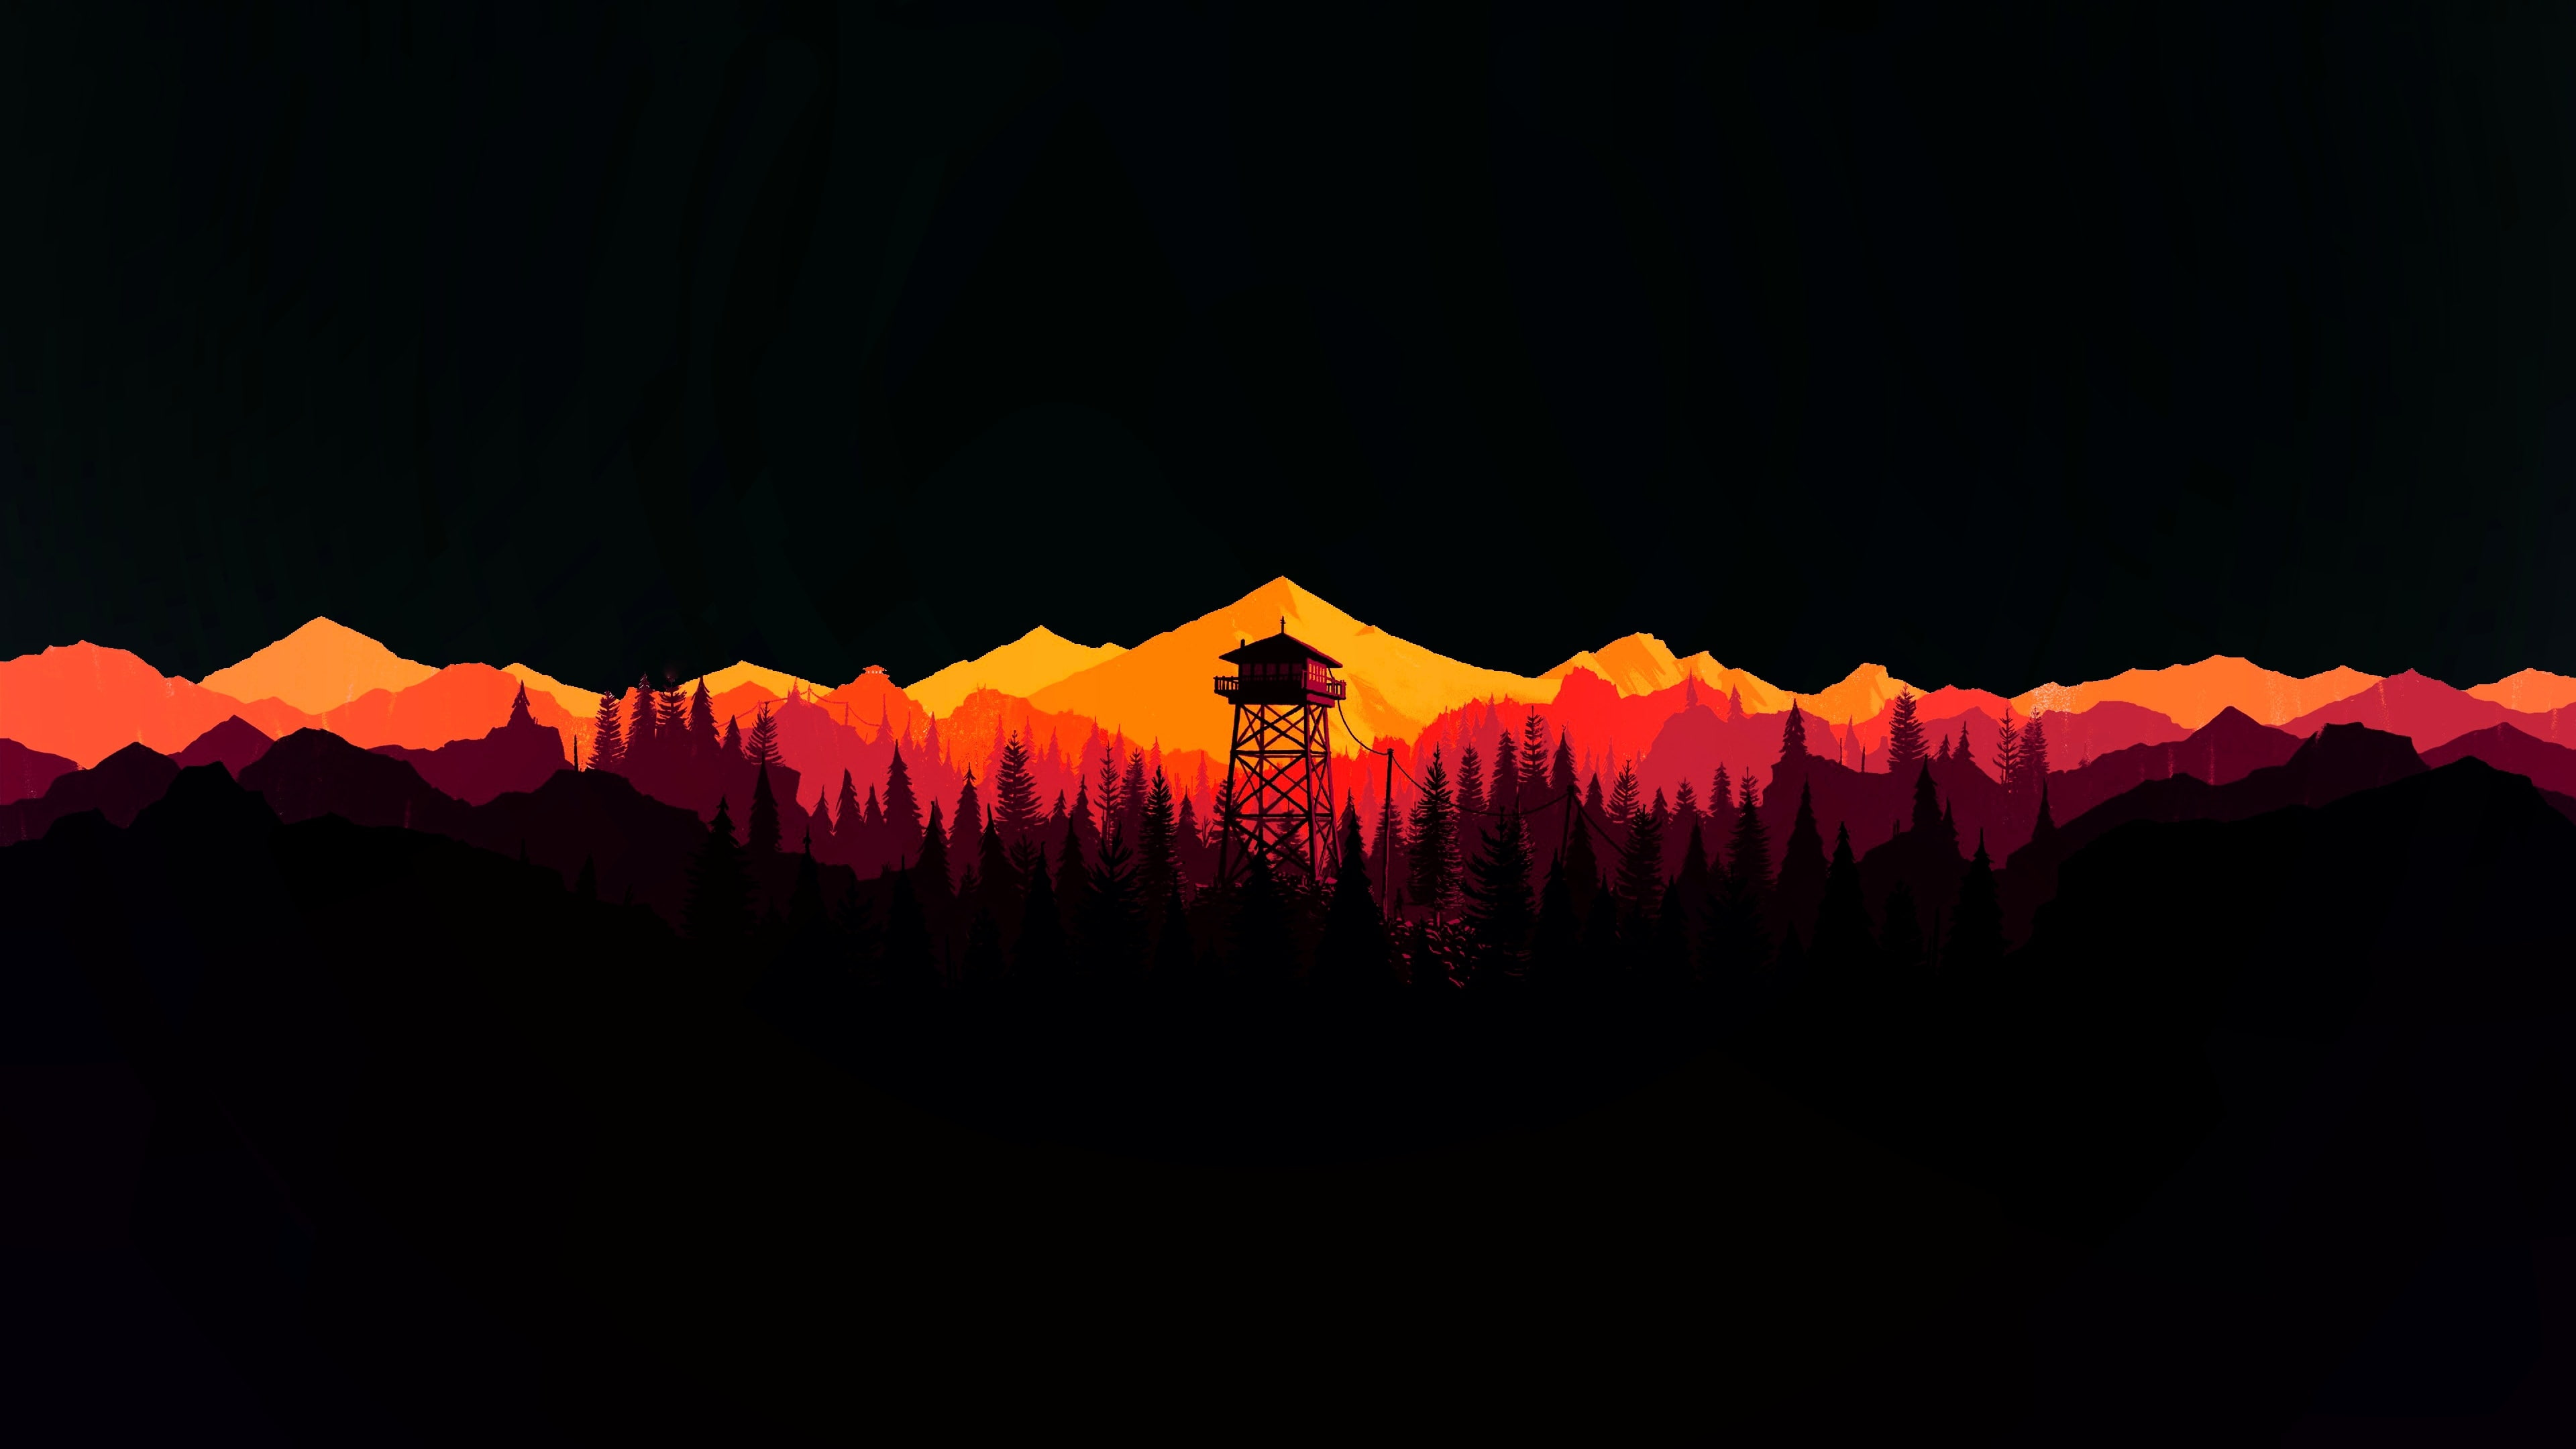 Watchtower in OLED style, mountain, sky, silhouette, beauty in nature